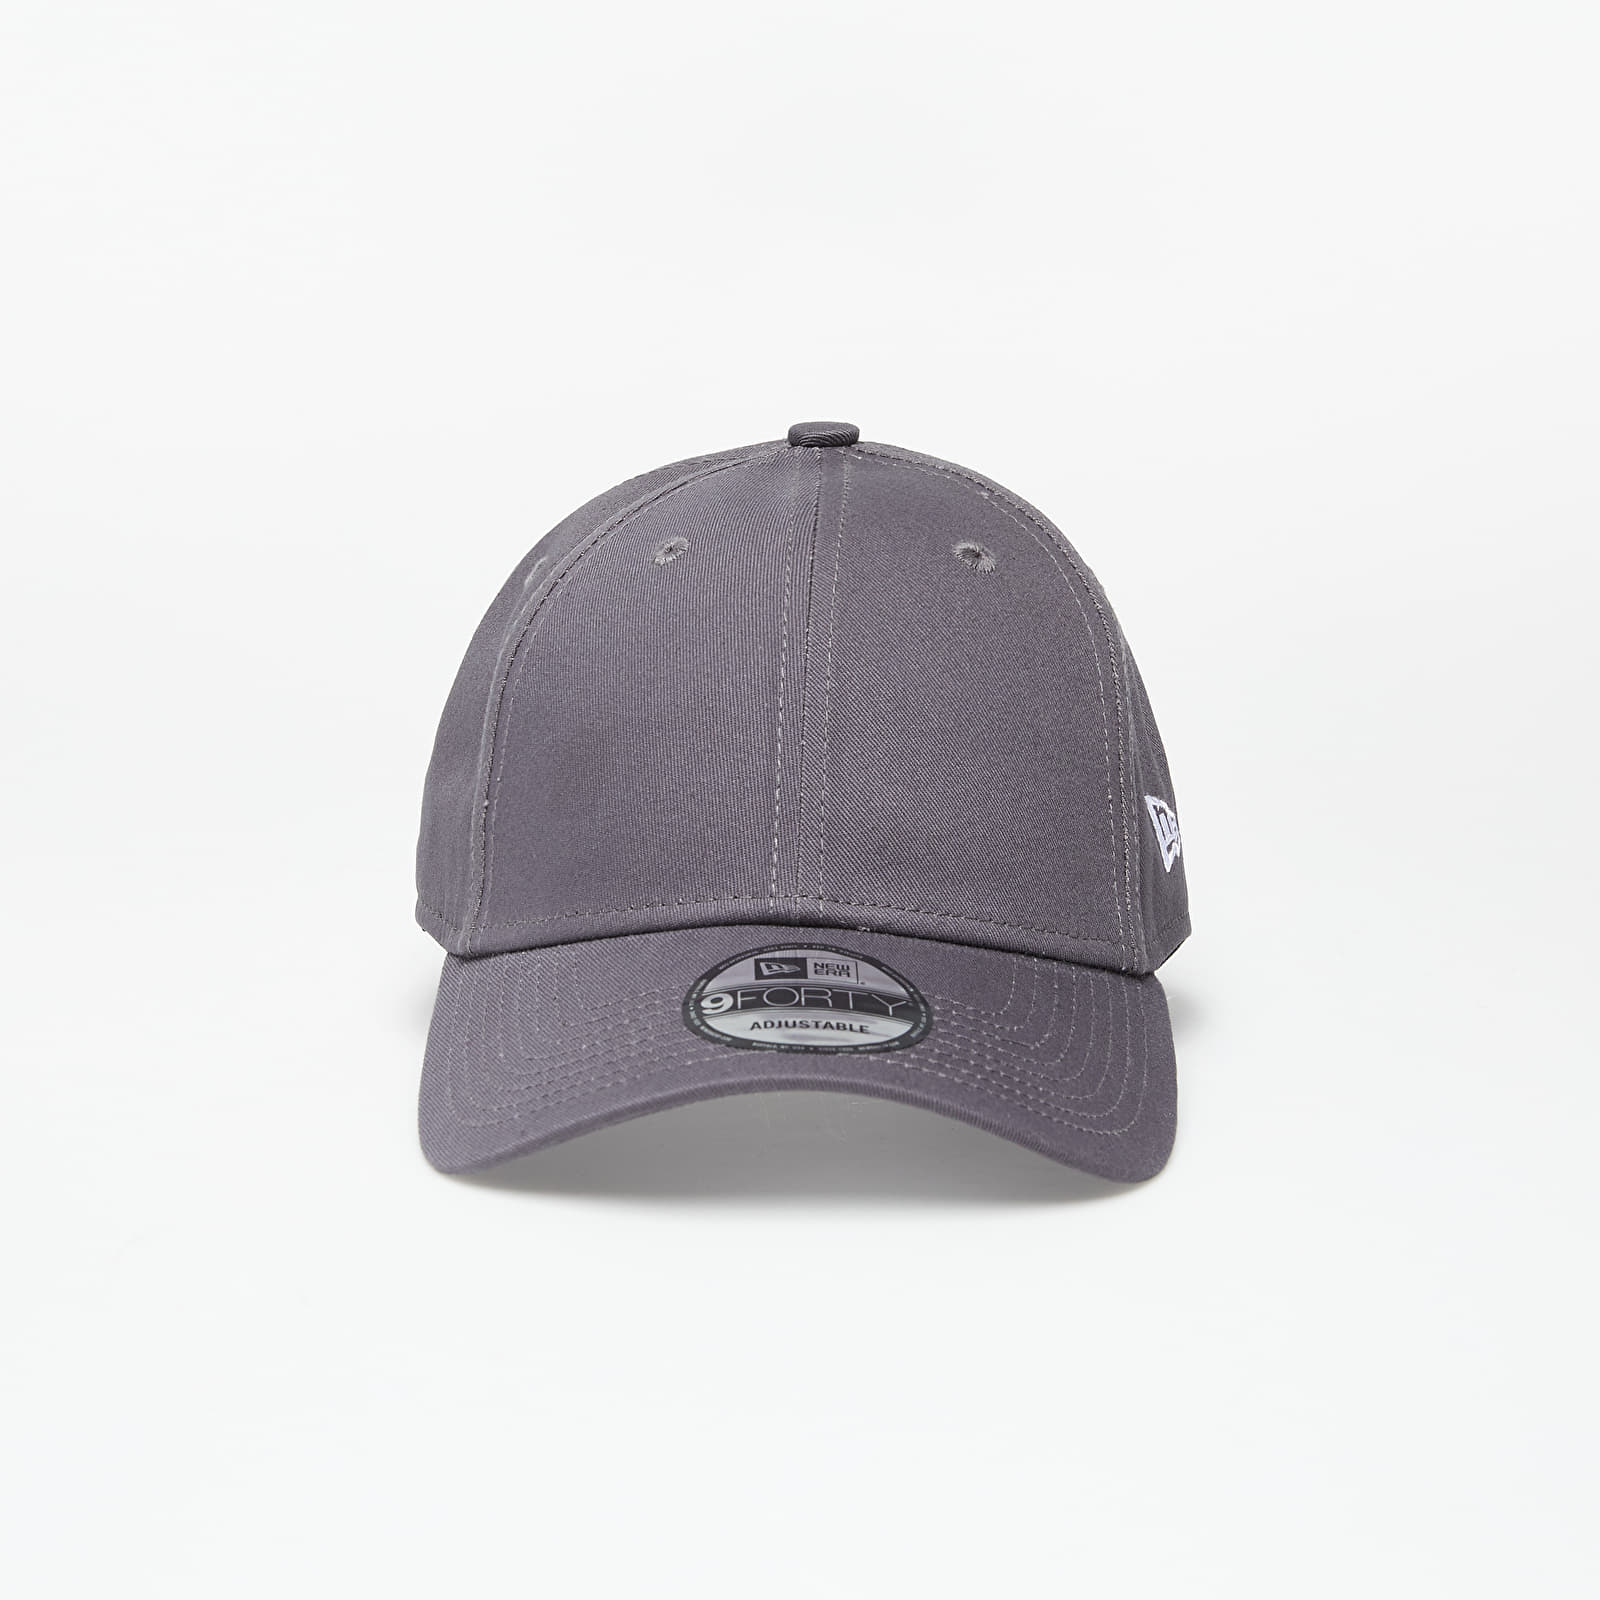 Caps New Era Cap 9Forty Flag Collection Grey/ White